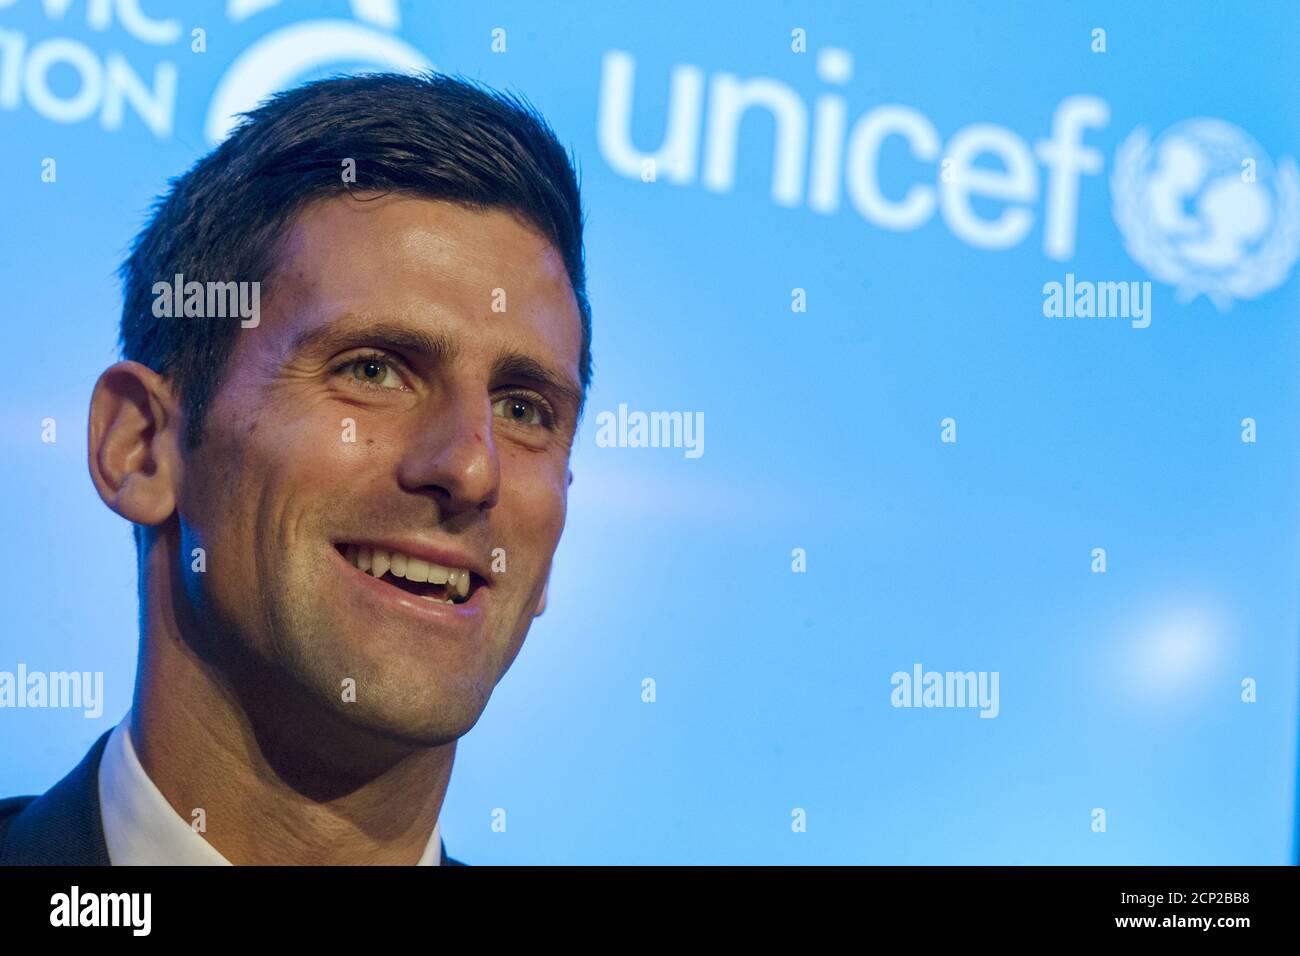 Serbian tennis player Novak Djokovic speaks during a news conference at the UNICEF headquarters in New York August 26, 2015. Djokovic announced a partnership between UNICEF, the World Bank Group and the Novak Djokovic Foundation.  REUTERS/Brendan McDermid Stock Photo